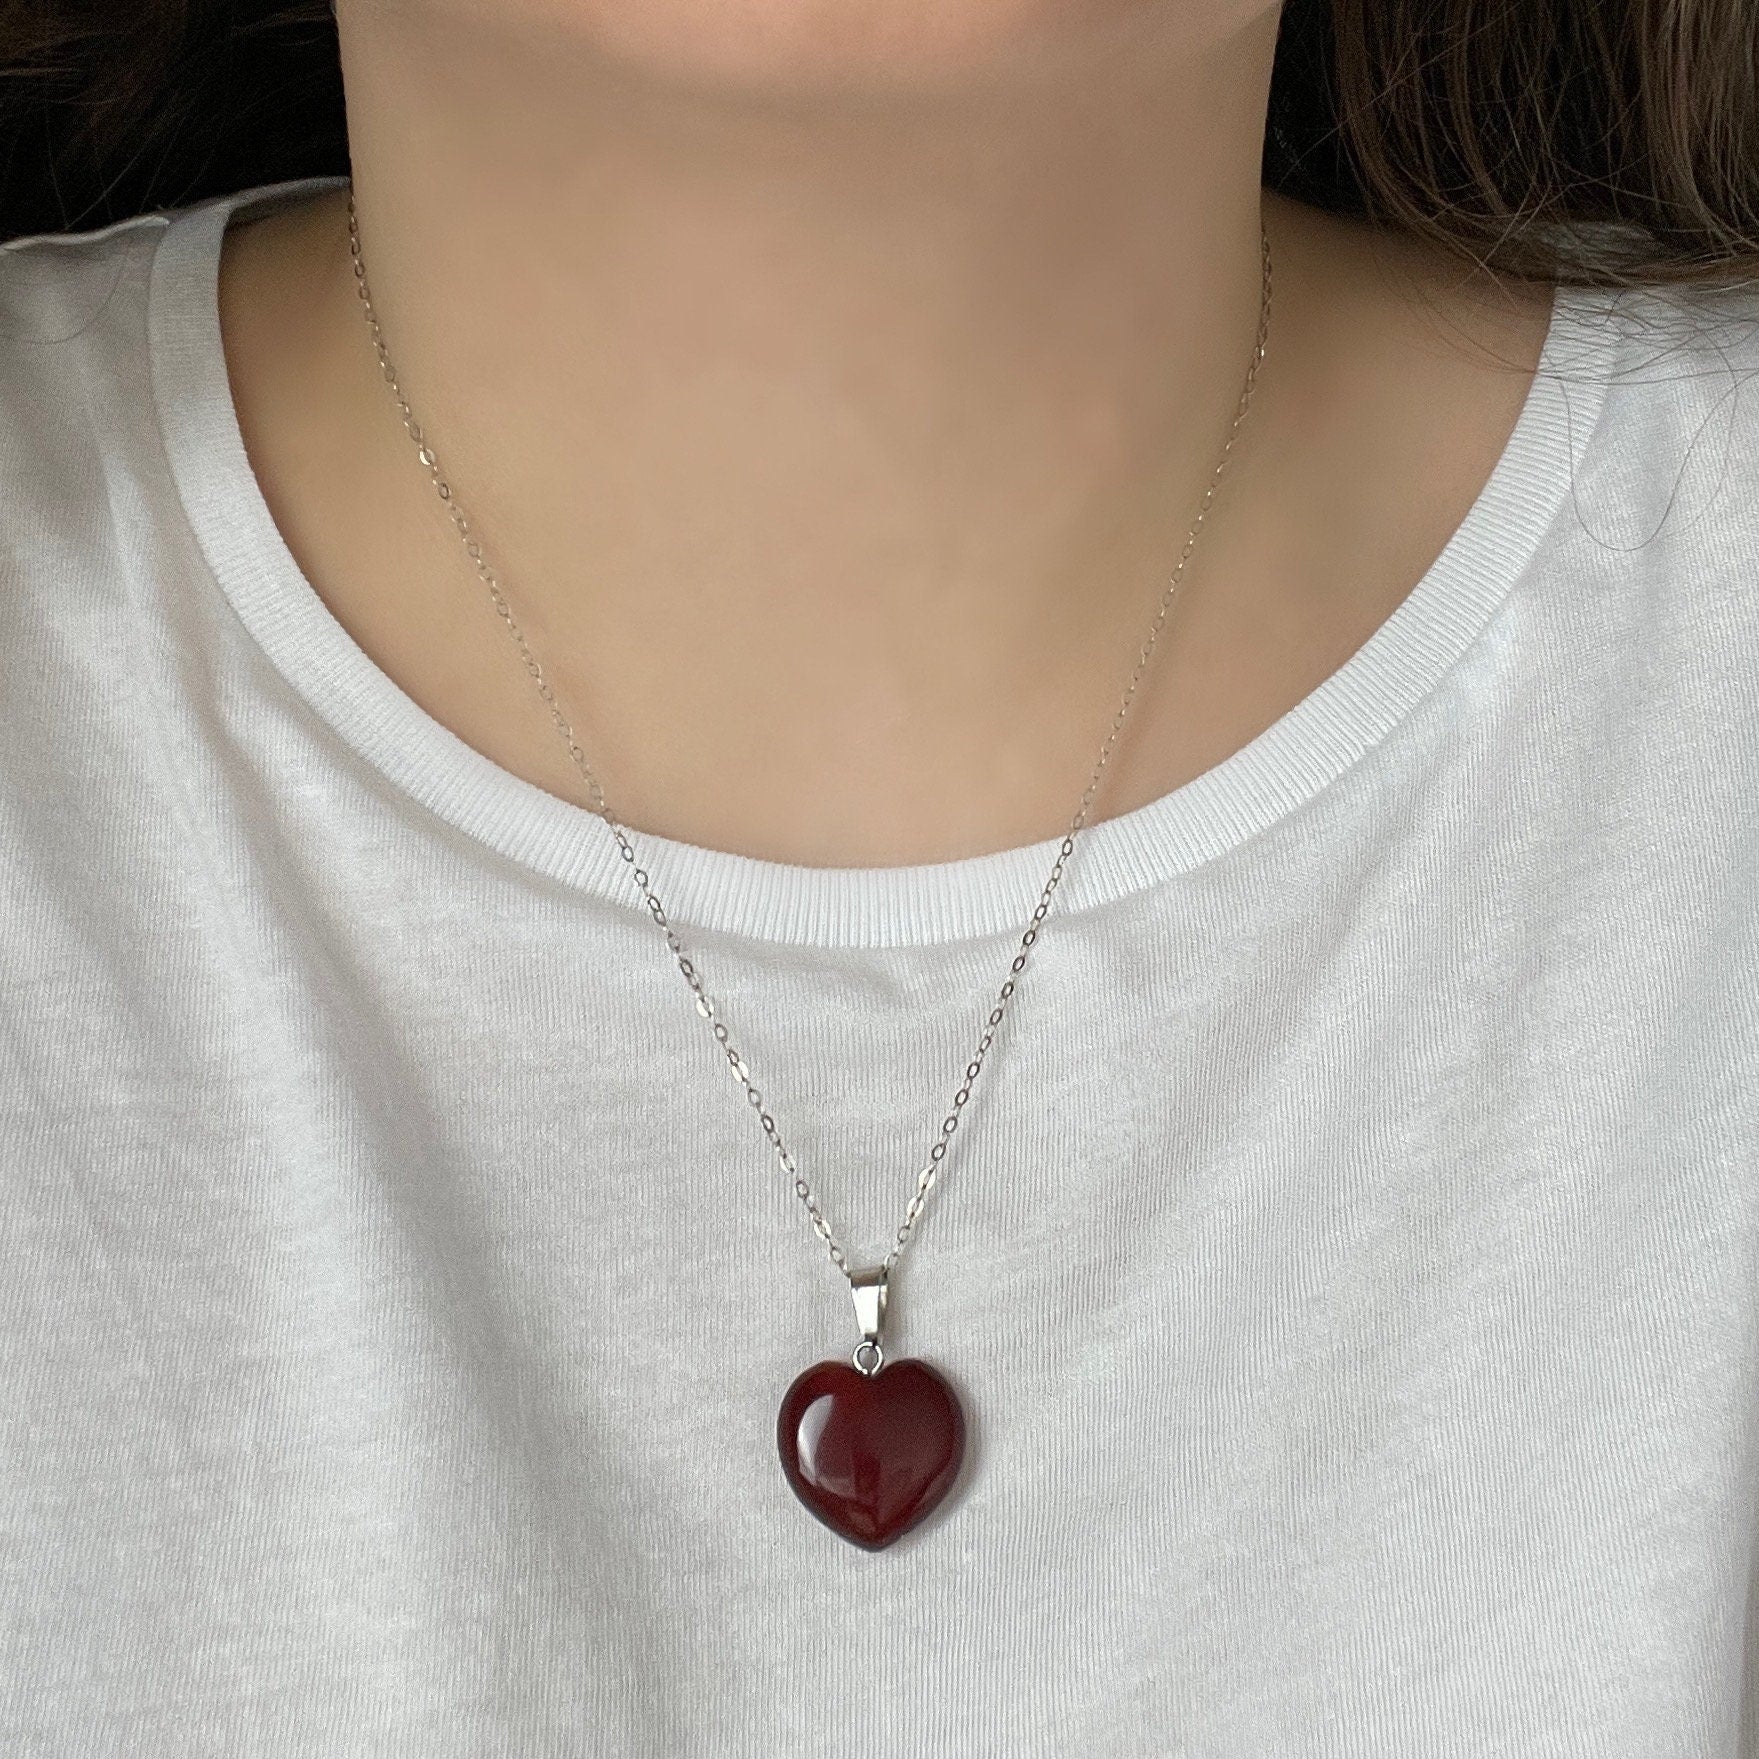 Carnelian Gemstone Necklace Silver, Heart Shaped Crystal For Layering, Boho Gifts For Her, M7-110